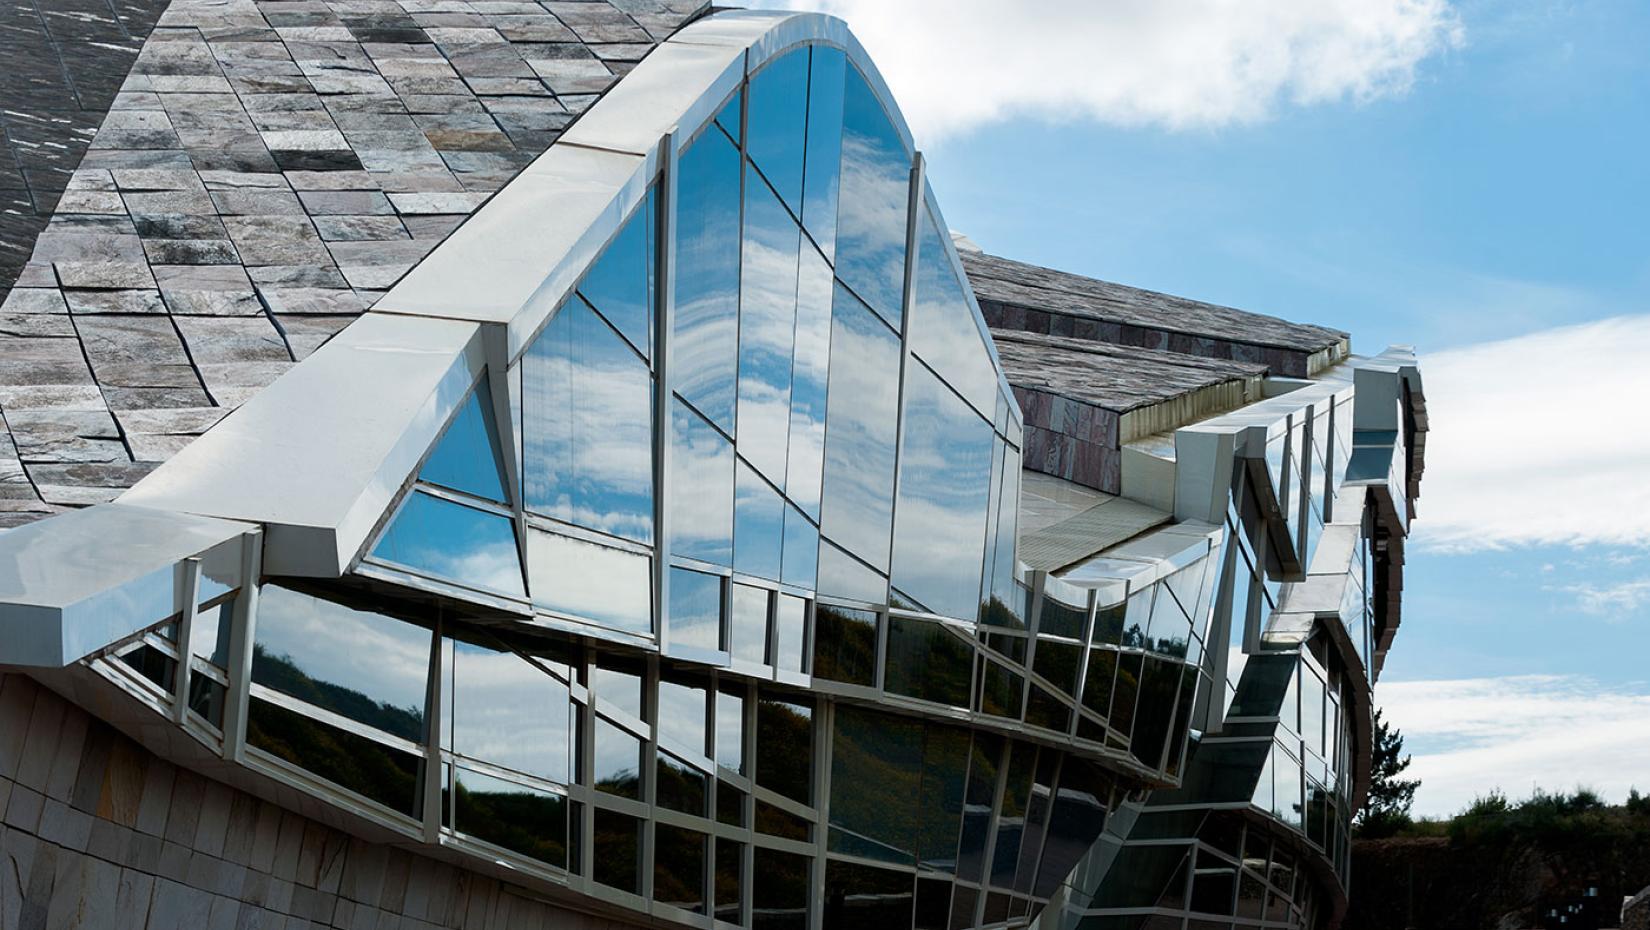 Detail view of curving building with wall of windows reflecting a bright blue sky and clouds.